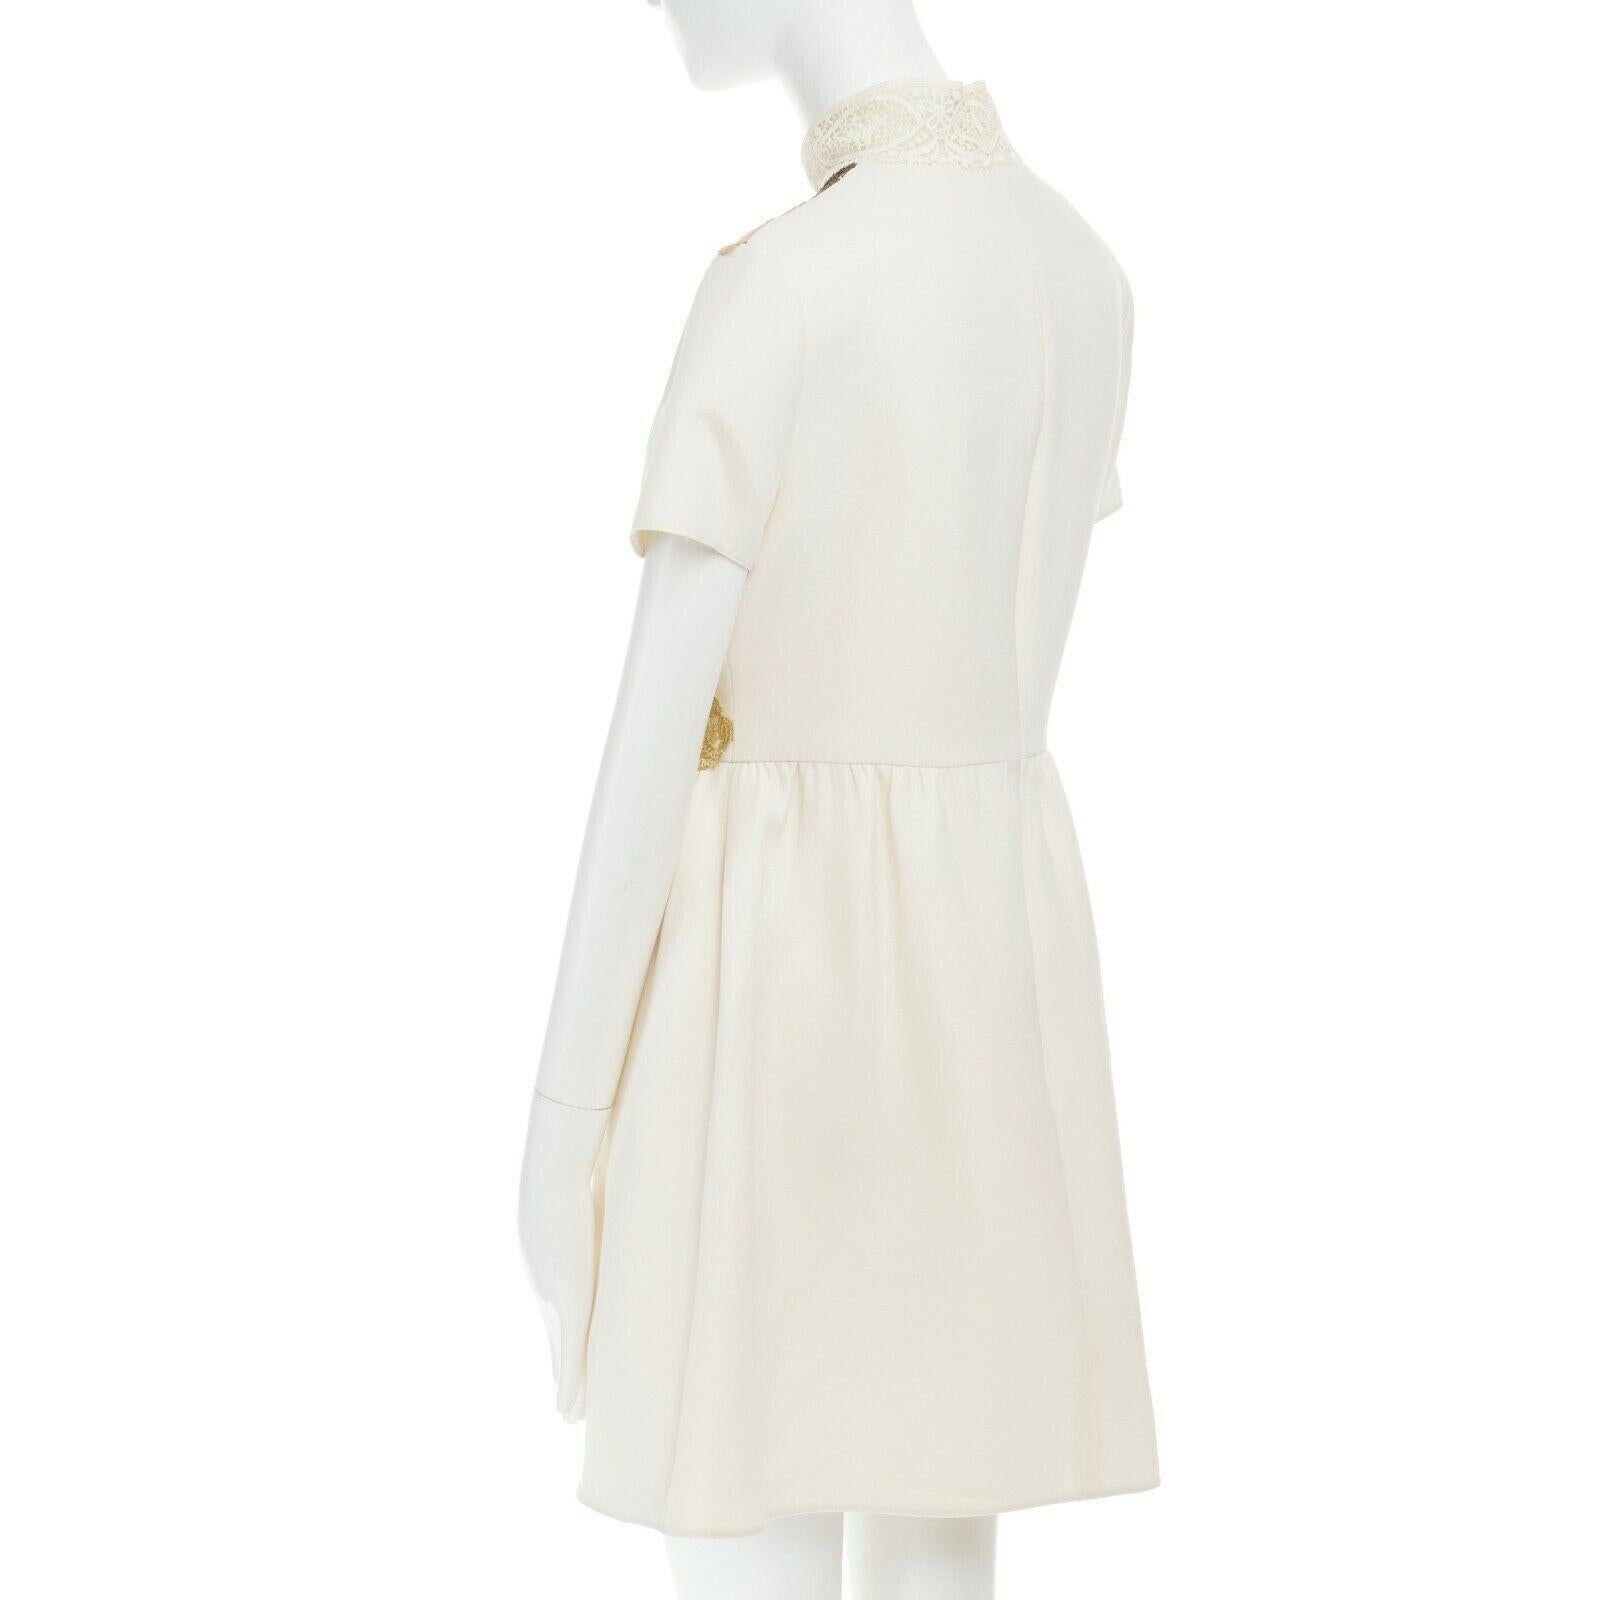 VALENTINO cream wool silk crepe embroidered lace high collar cocktail dress IT42 2